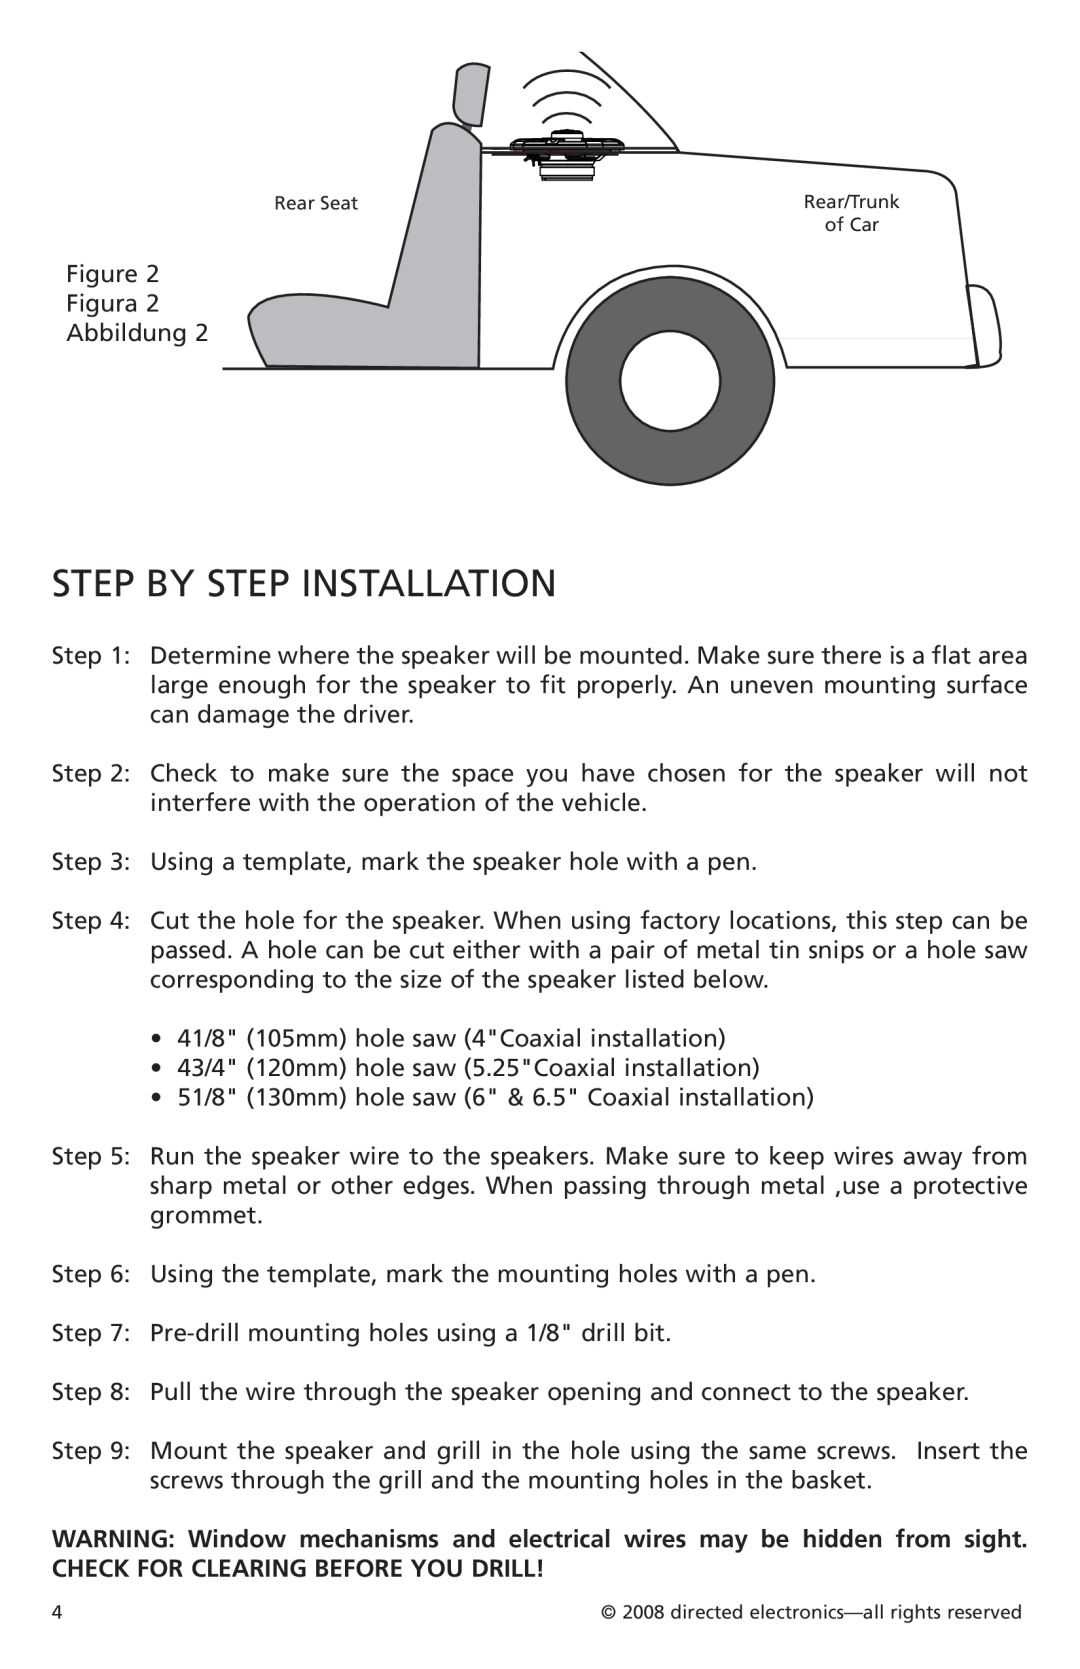 Orion Car Audio XTR462, XTR652, XTR693, XTR602, XTR522, XTR572 Step By Step Installation, Check For Clearing Before You Drill 